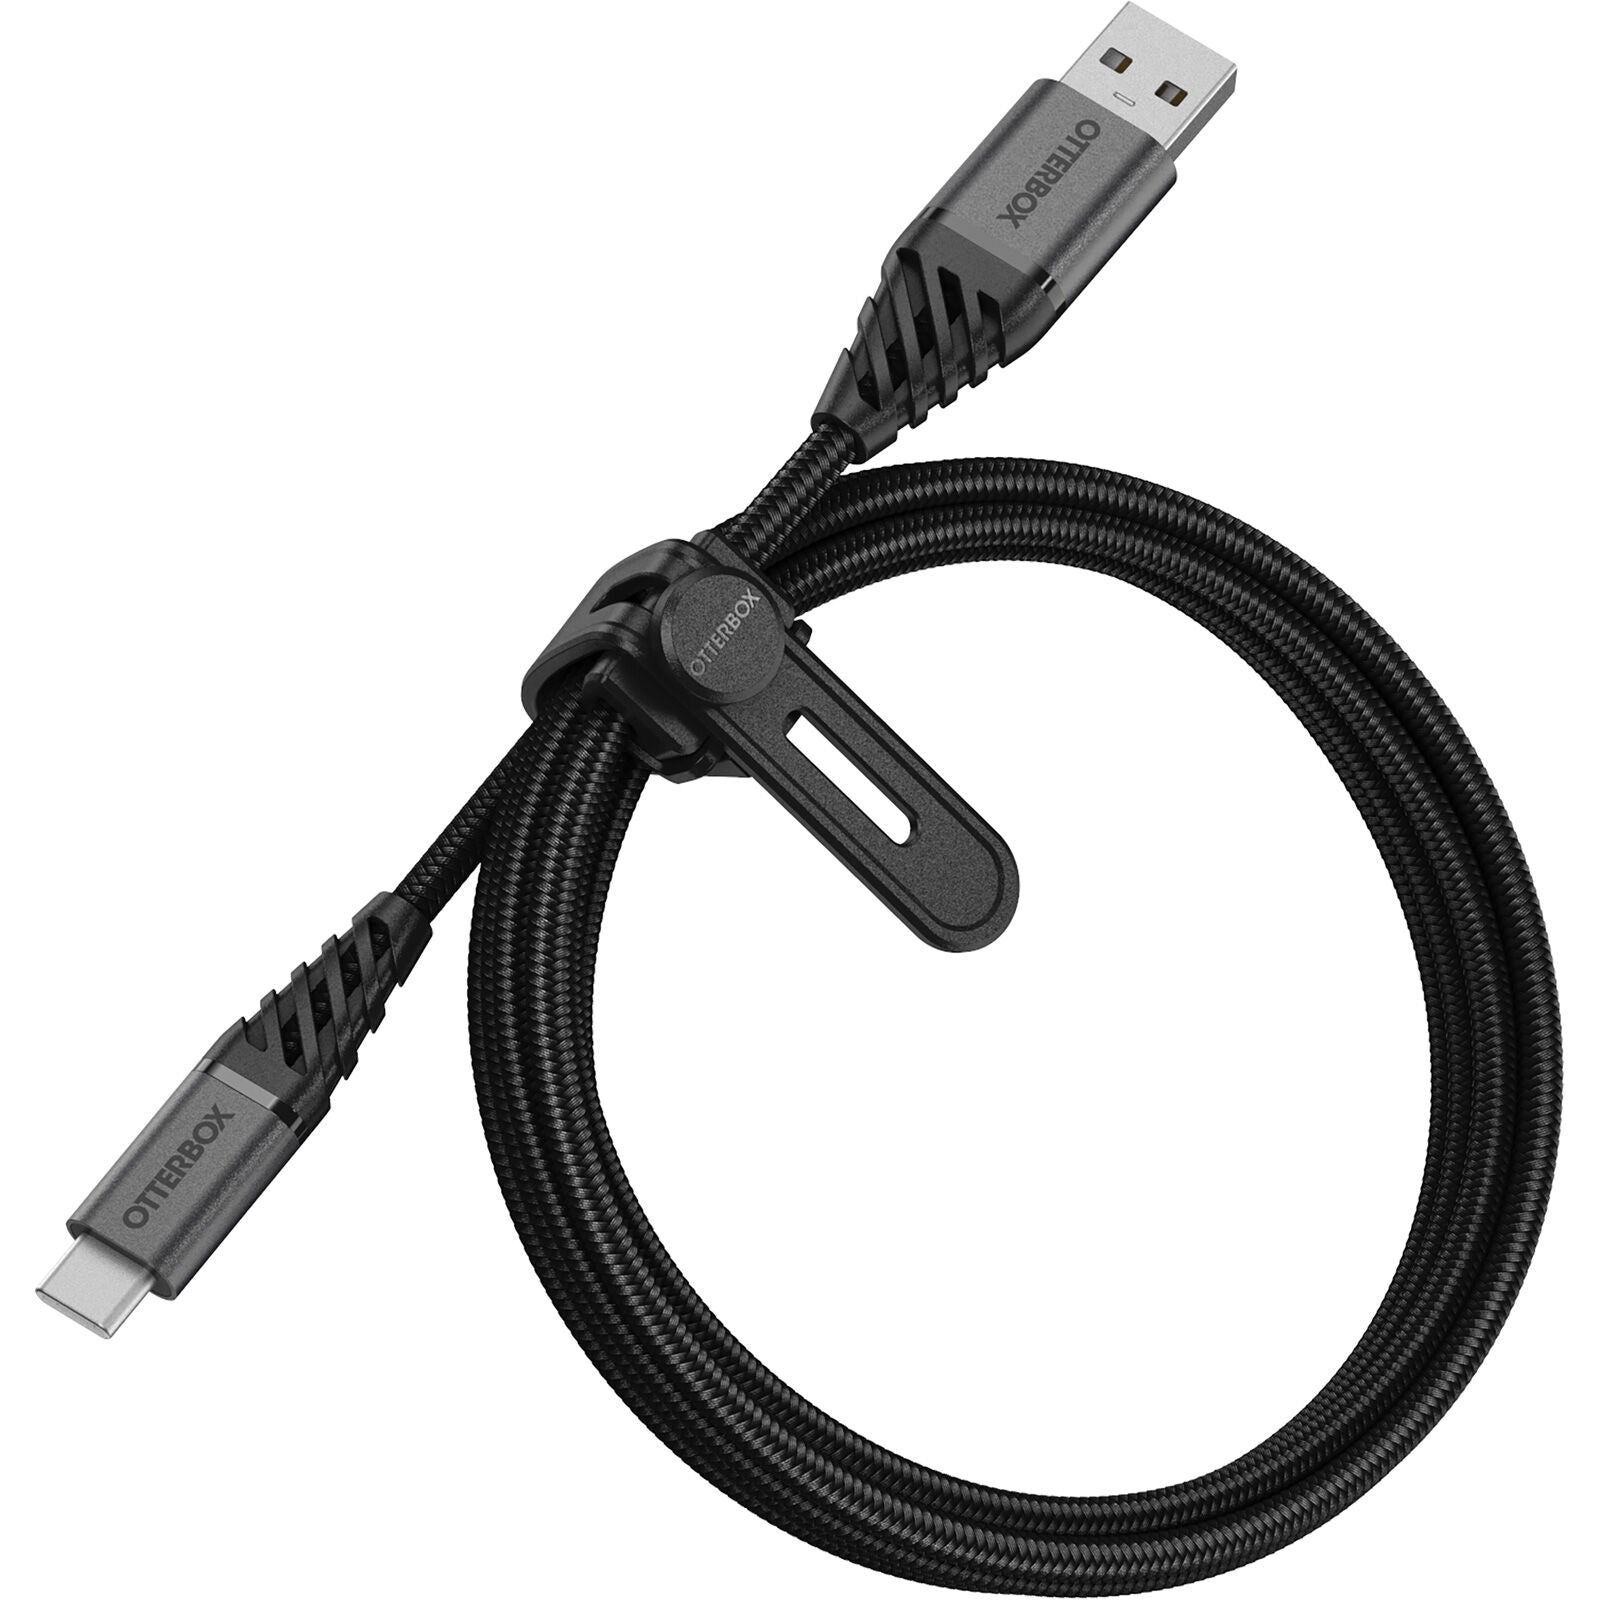 OtterBox USB-C to USB-A Premium Cable (1M) - Black (78-52664), USB 2.0, 3 AMPS (60W), Bend/Flex-Tested 10K Times, Braided Nylon, Ultra Rugged